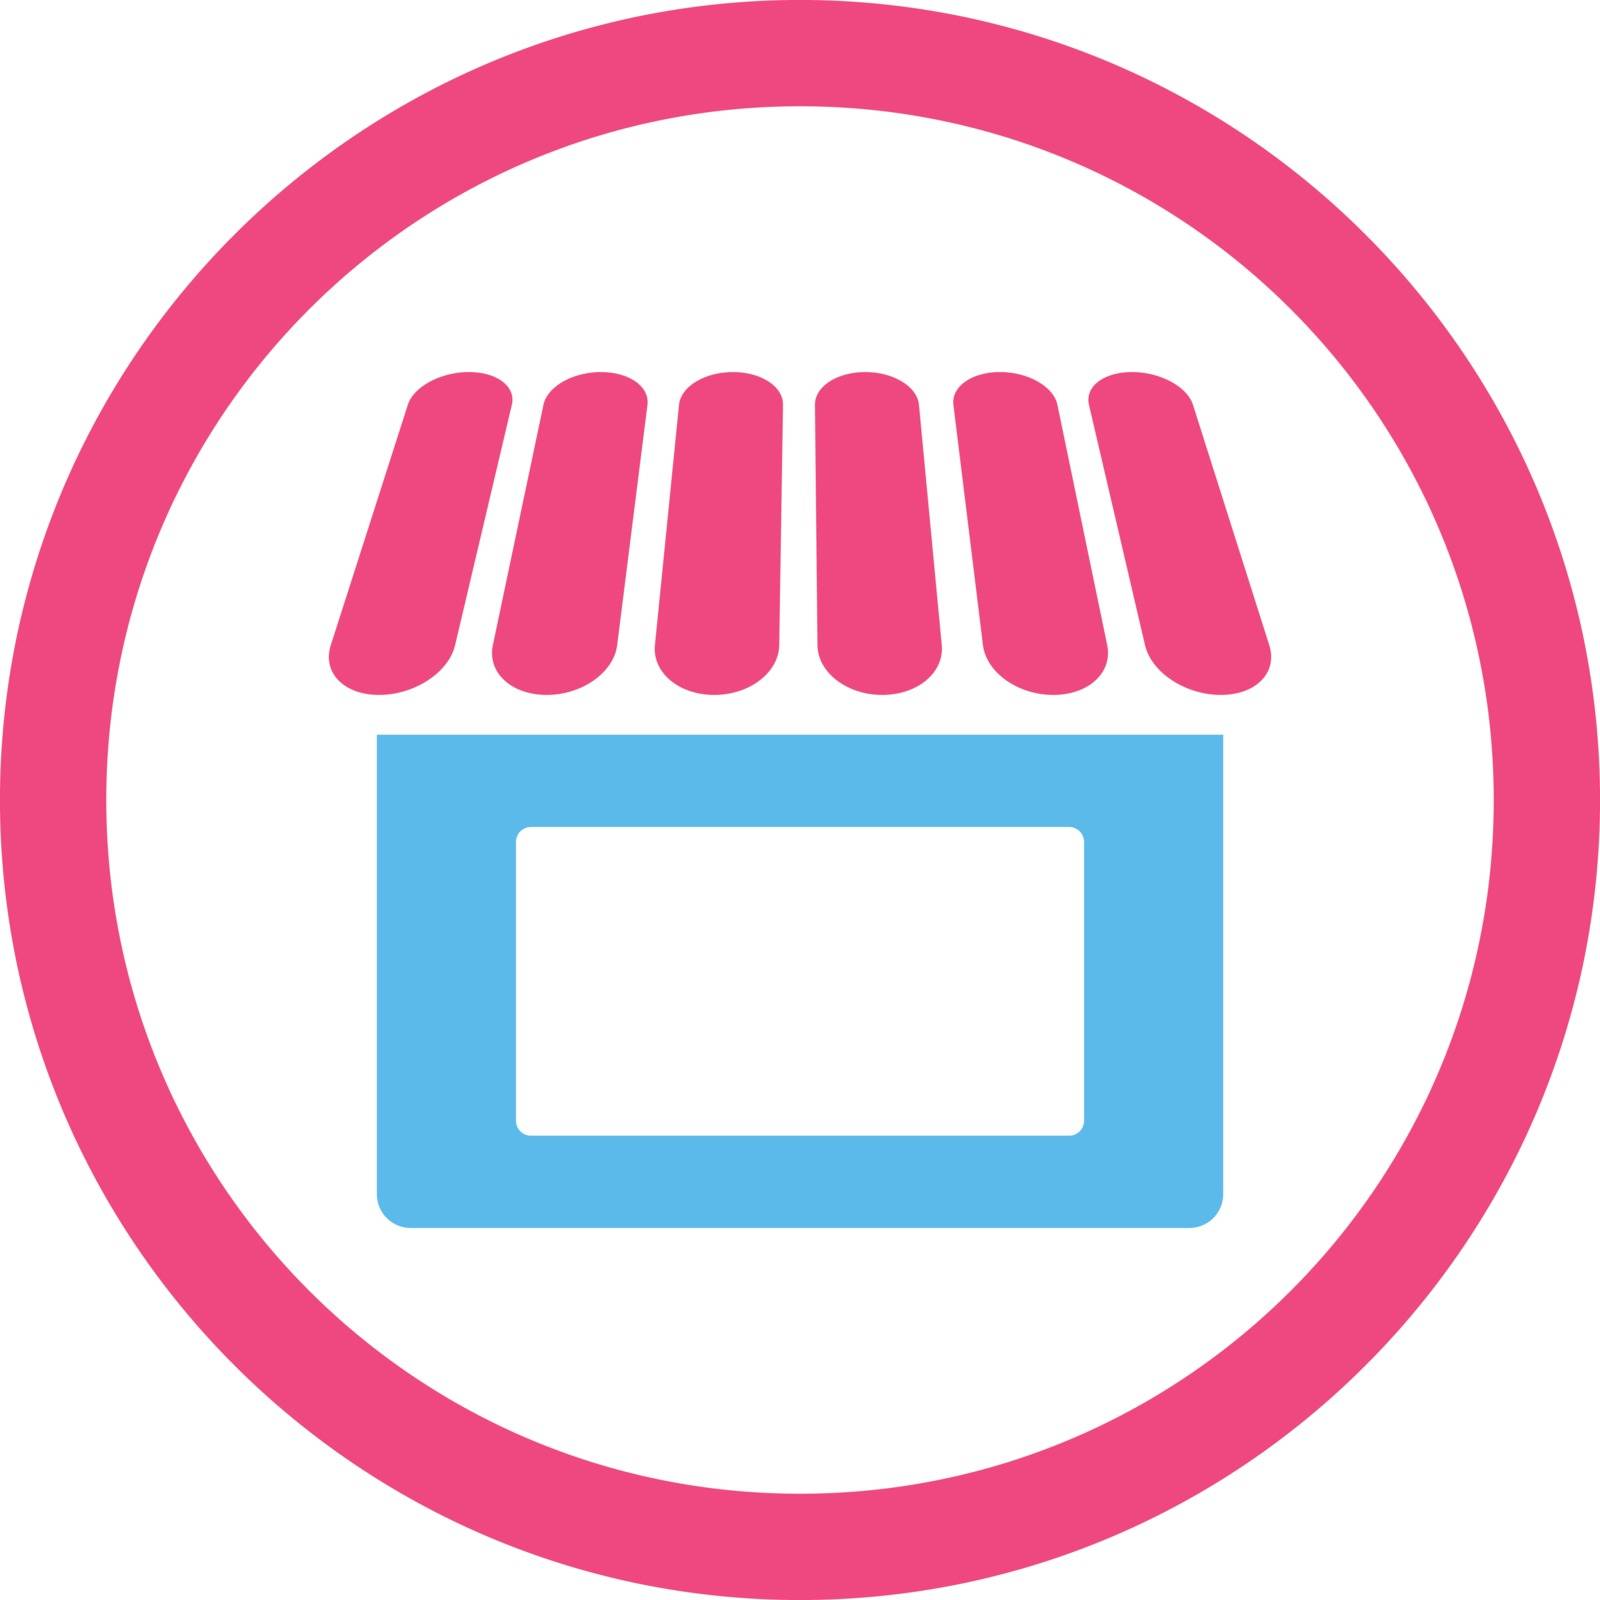 Shop vector icon. This flat rounded symbol uses pink and blue colors and isolated on a white background.